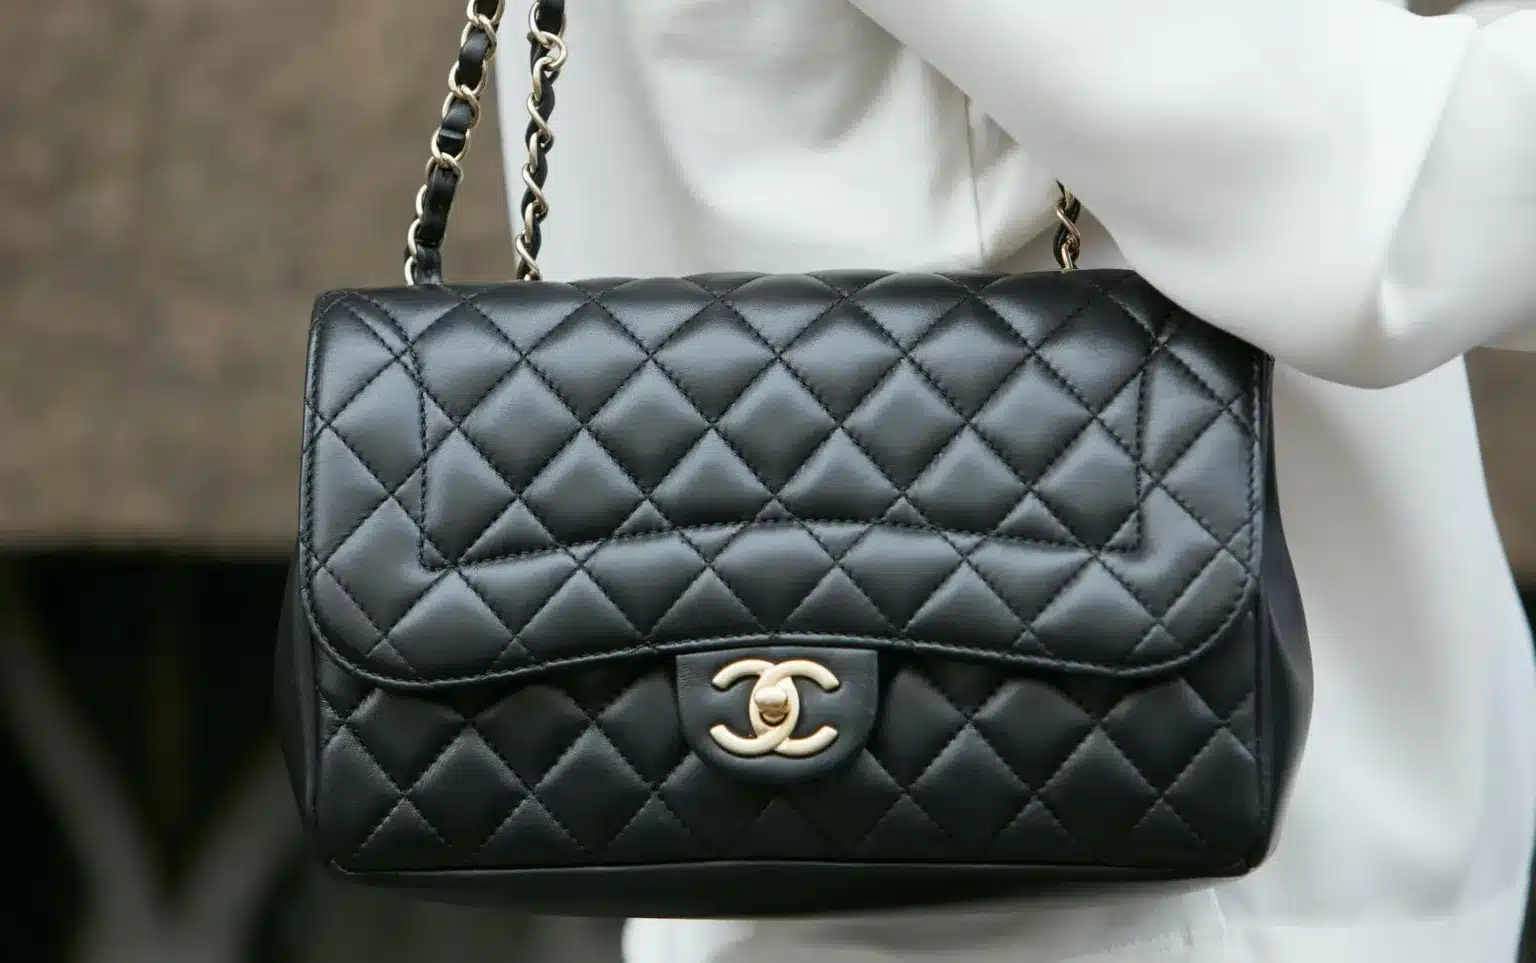 Milan, , September, :, Woman, With, Chanel, Black, Leather, Bag